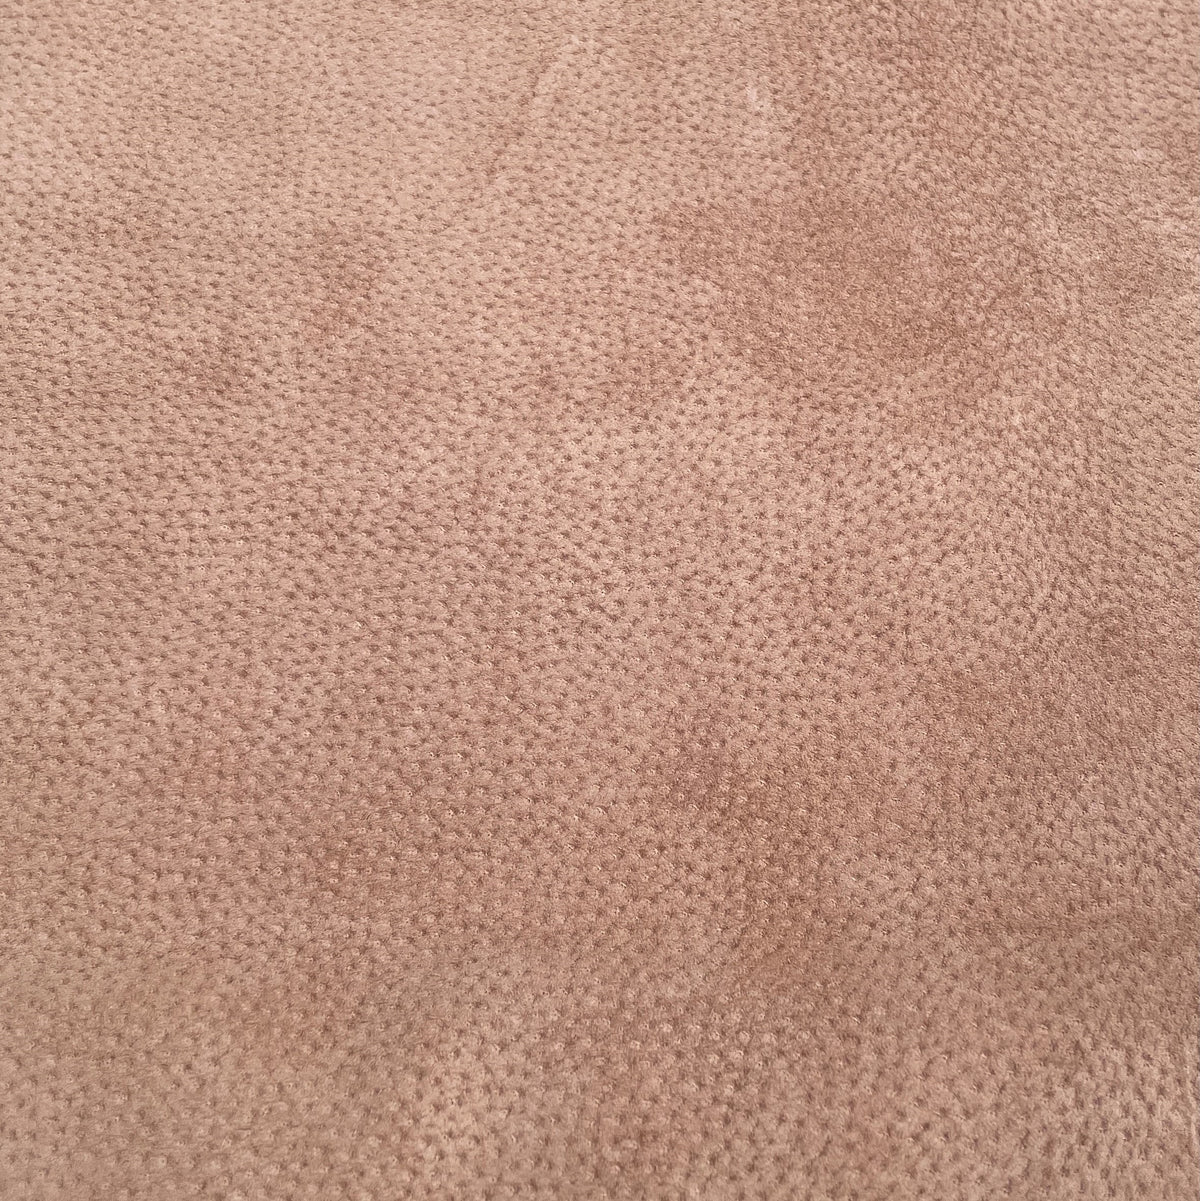 Pig Skin Suede | Camel | 0.6 mm | 8 sq.ft | From $25 ea.